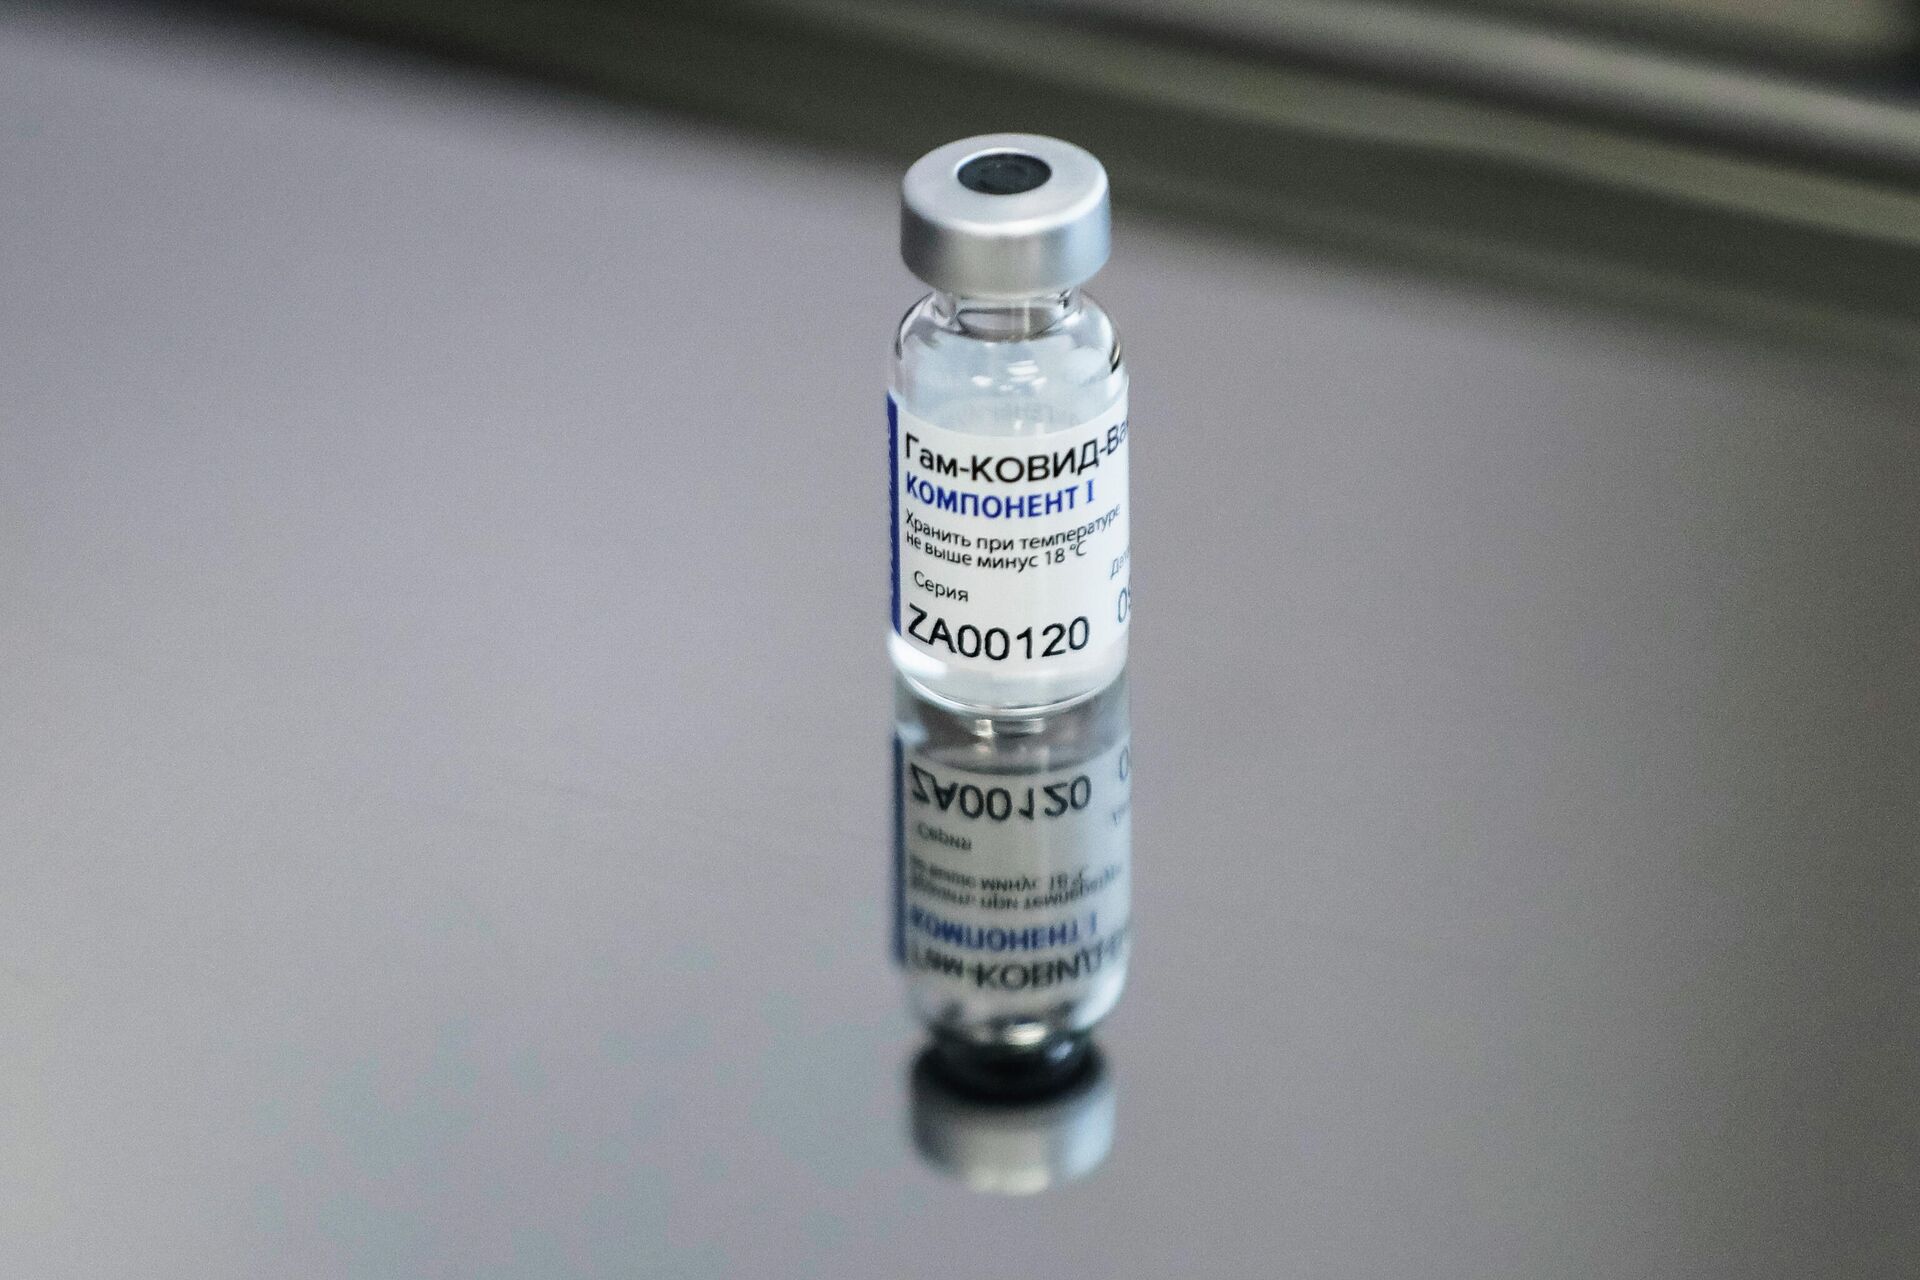 In this Thursday, Dec. 10, 2020 file photo, a vial with Russia's Sputnik V coronavirus vaccine in a medical room rests on a table prior to a vaccination in Moscow. The South African drug regulator has rejected the Russian-made coronavirus vaccine Sputnik V, citing some safety concerns the manufacturer wasn't able to answer. In a statement on Tuesday, the country's regulator, also known as SAHPRA, said the request for Sputnik V to be authorized could “not be approved at this time,” referring to past failed HIV vaccines that used a similar technology. - Sputnik International, 1920, 20.11.2021